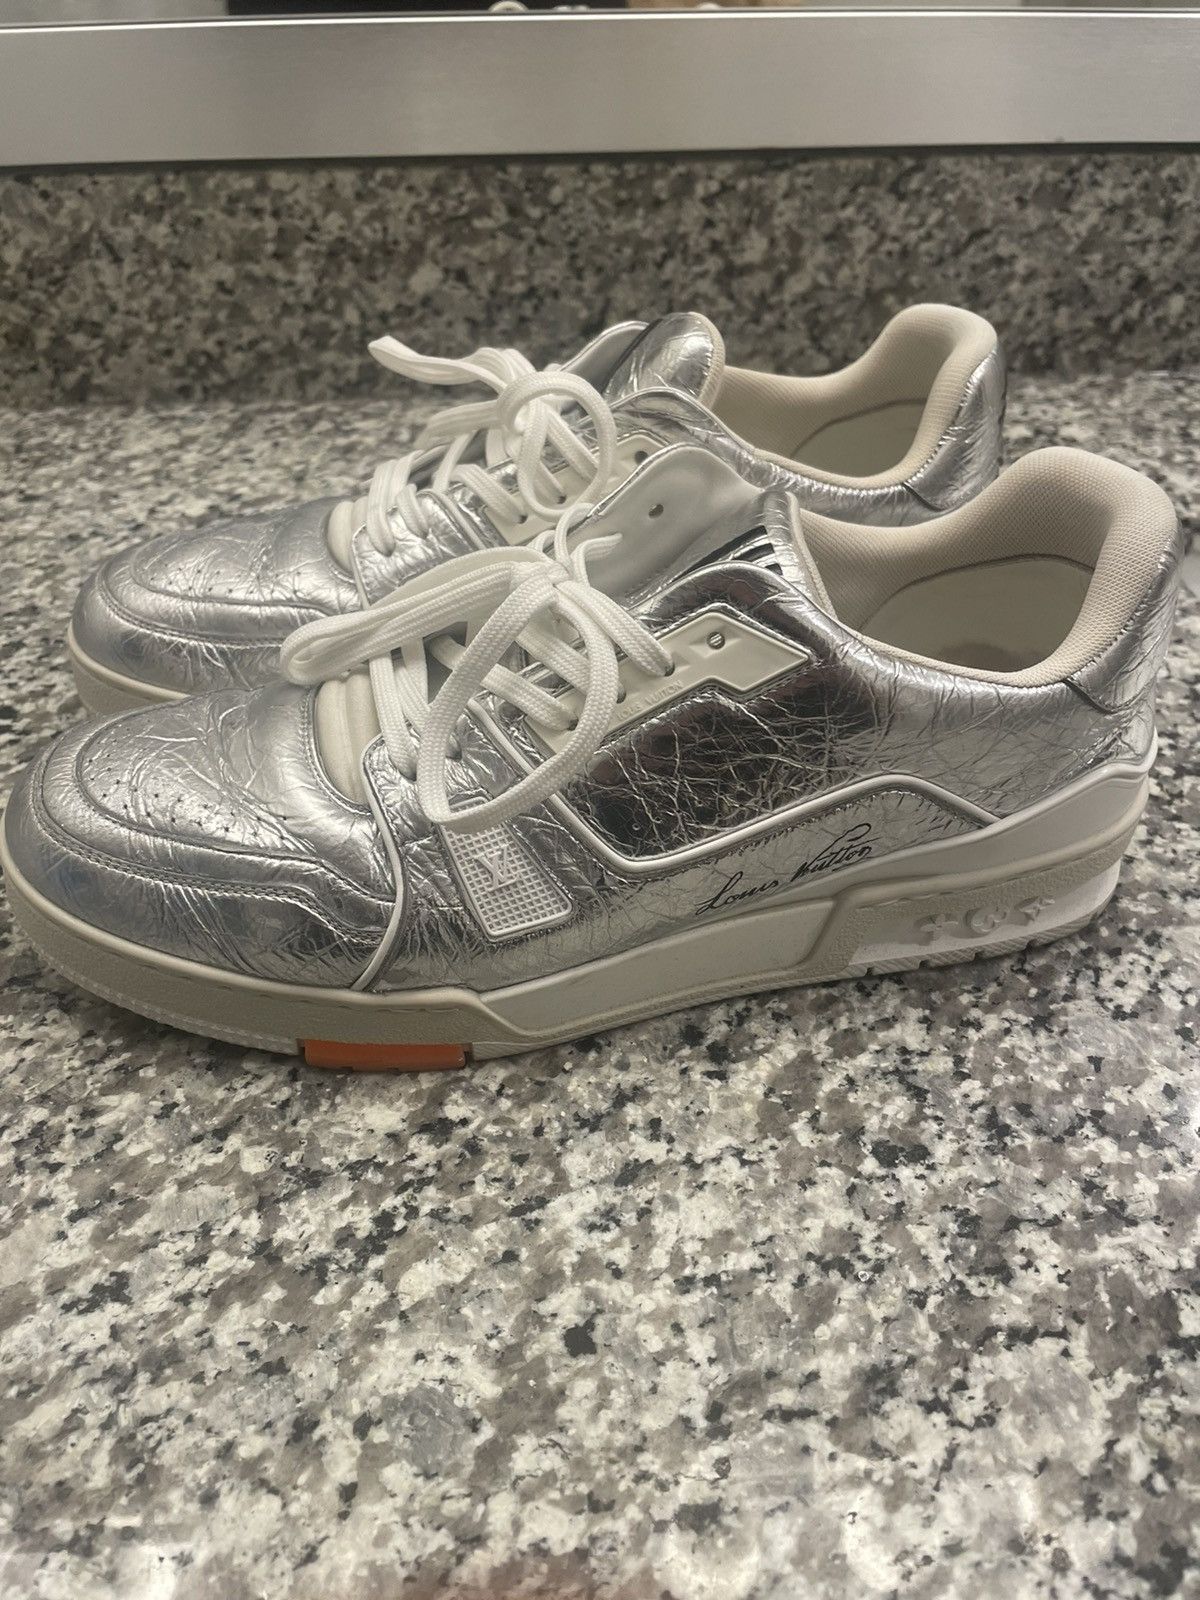 Louis Vuitton Trainer Sneakers Metallic Leather Sliver - Lsvt095